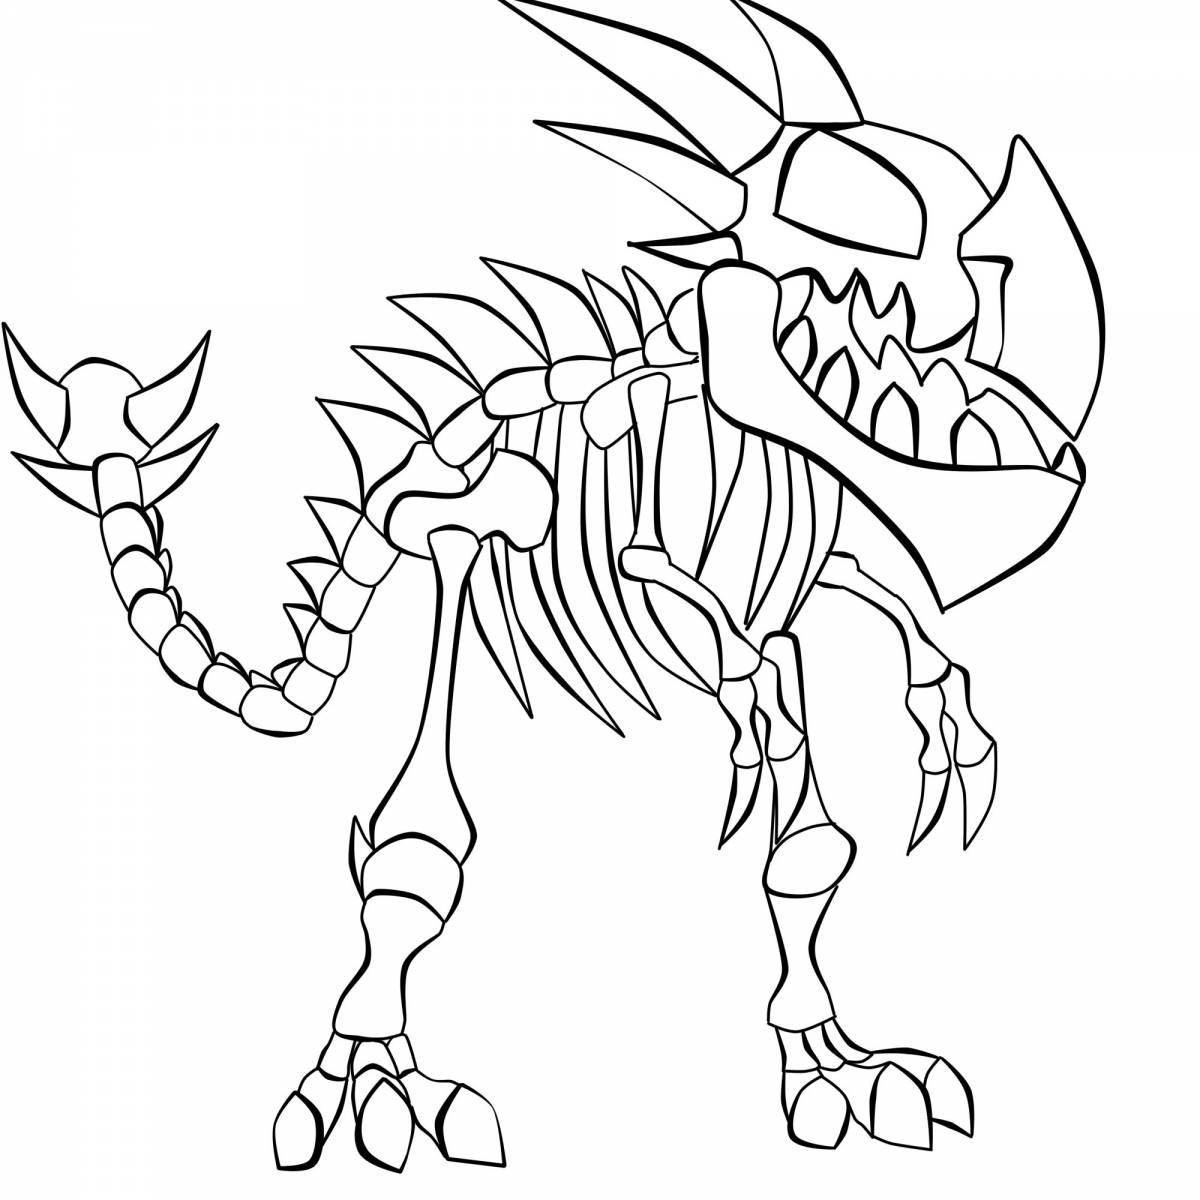 Alarm monster with siren head coloring page